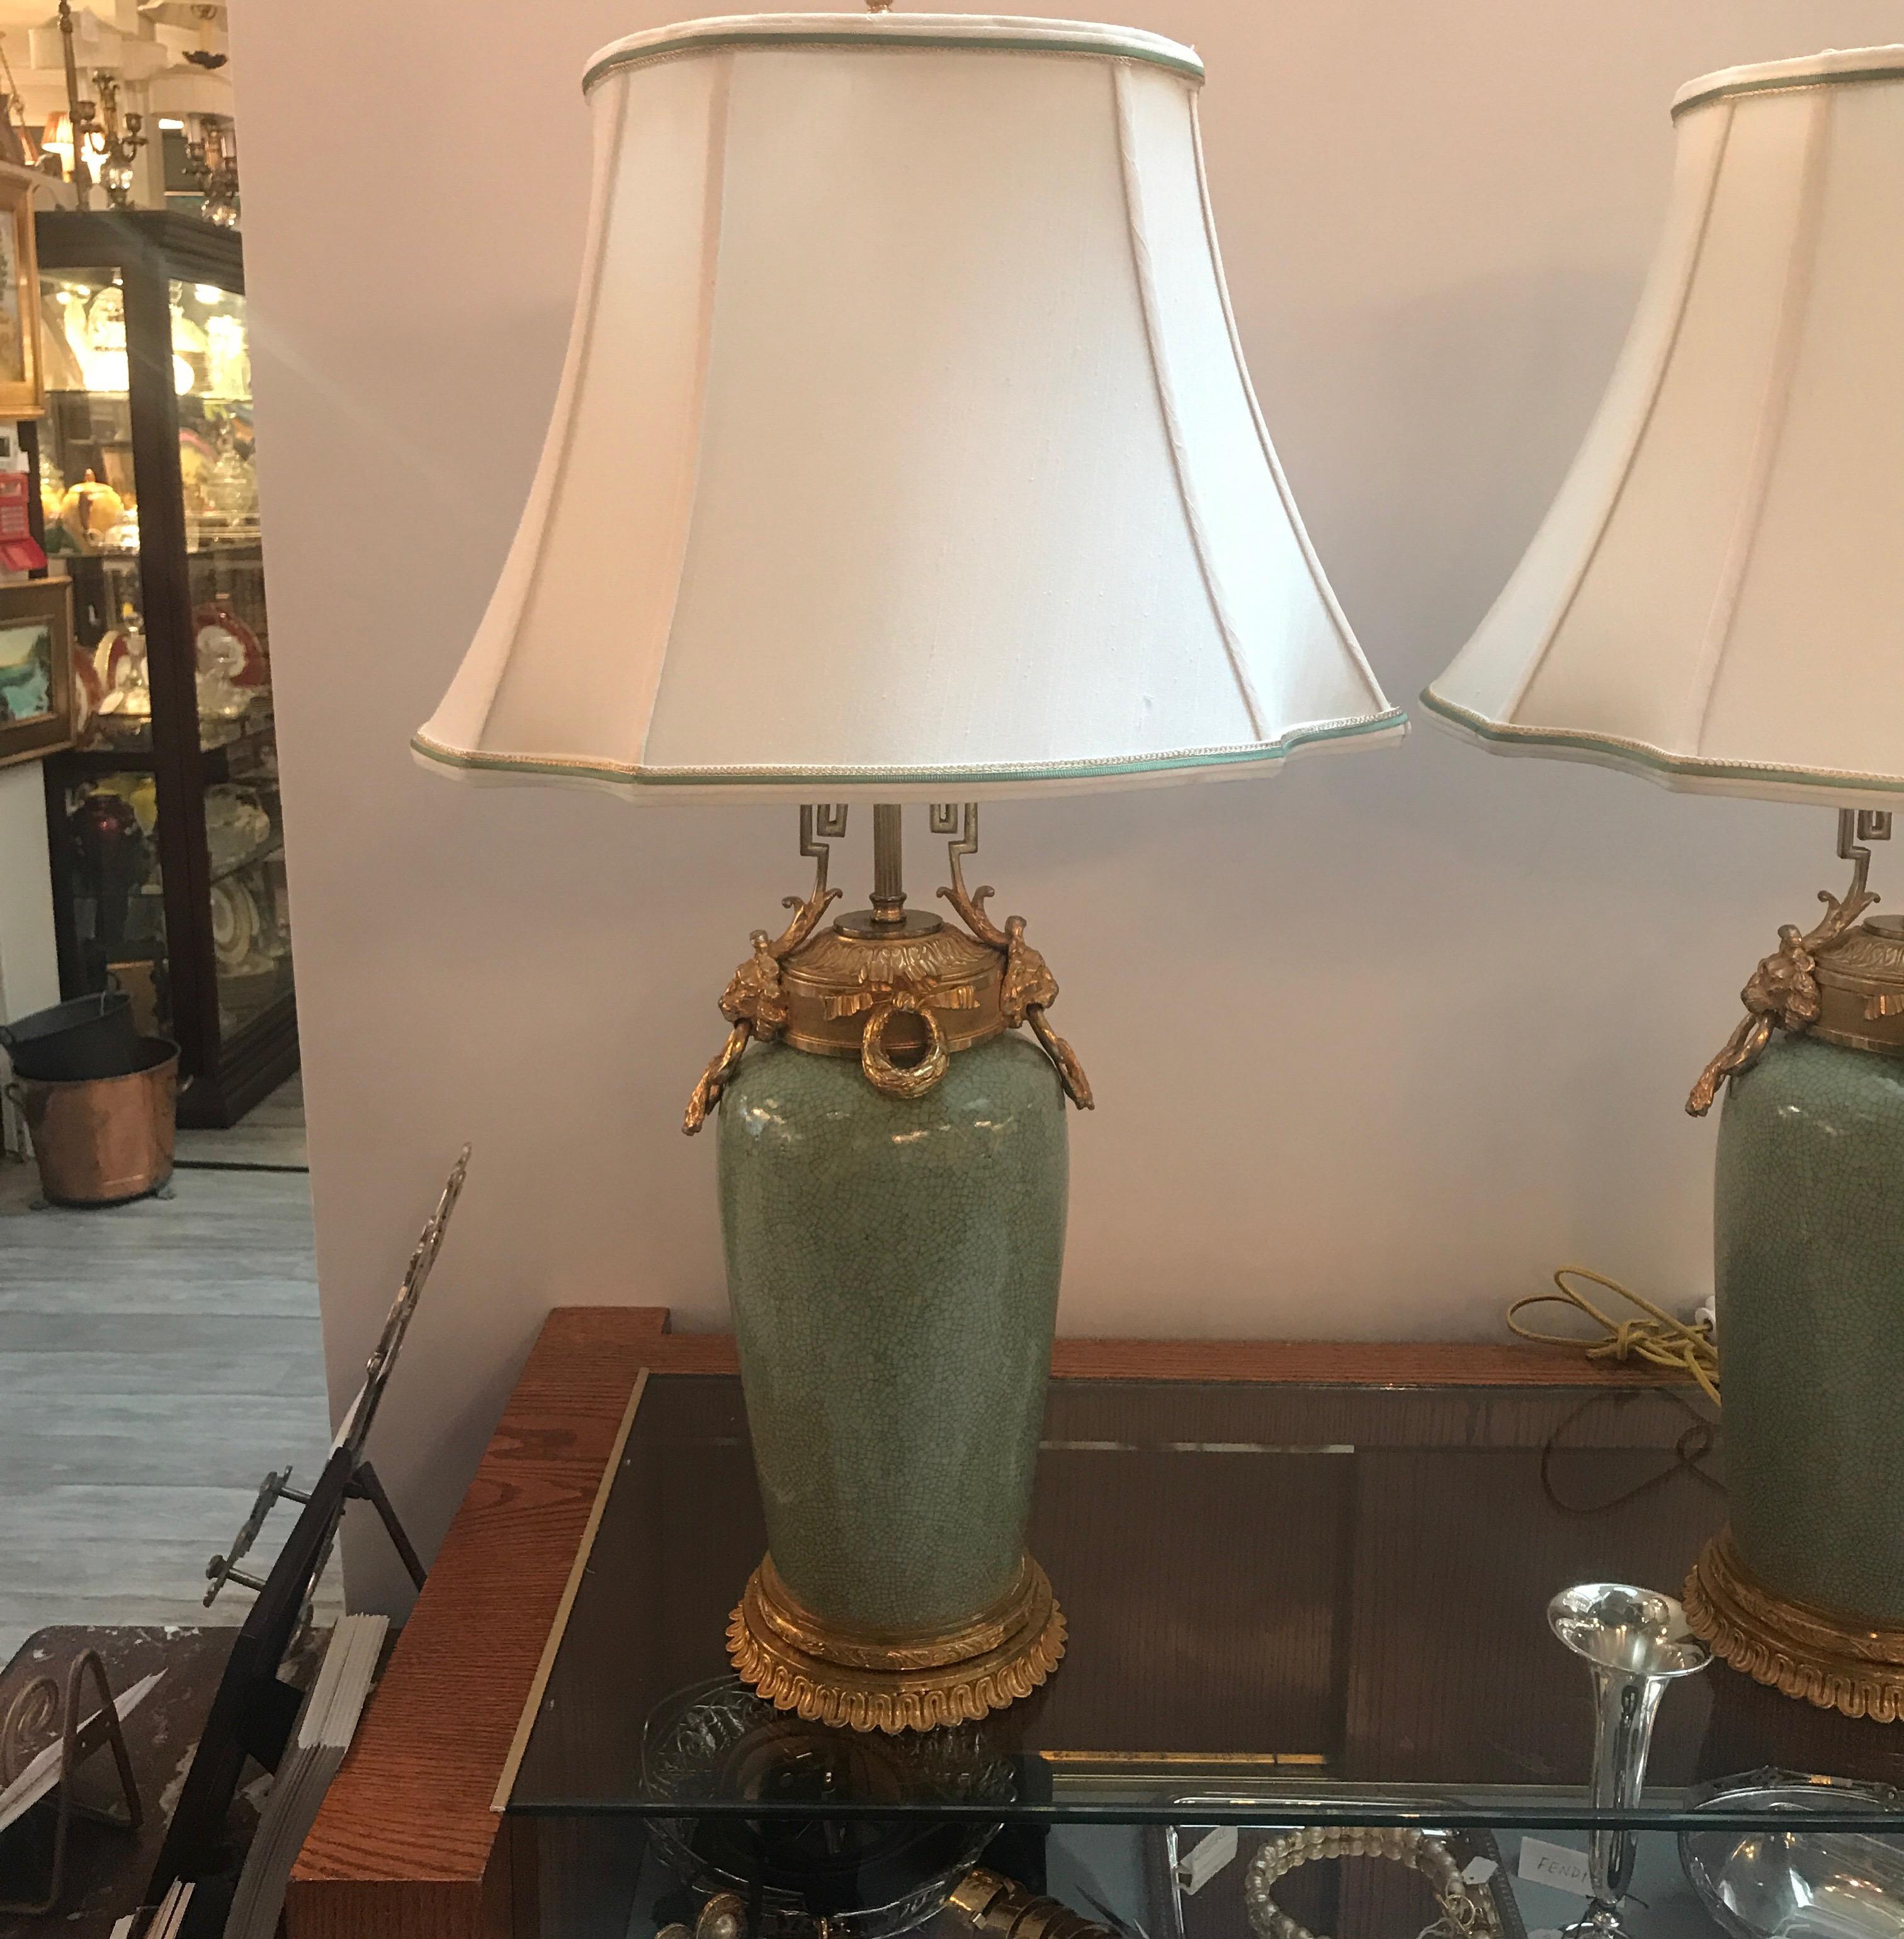 Elegant pair of Chinese porcelain celedon vases now as lamps with later French gilt bronze mounts. The porcelain in celedon green with a light crackle finish with gilt tops and bases. The shades are for photographic purposes only and not included